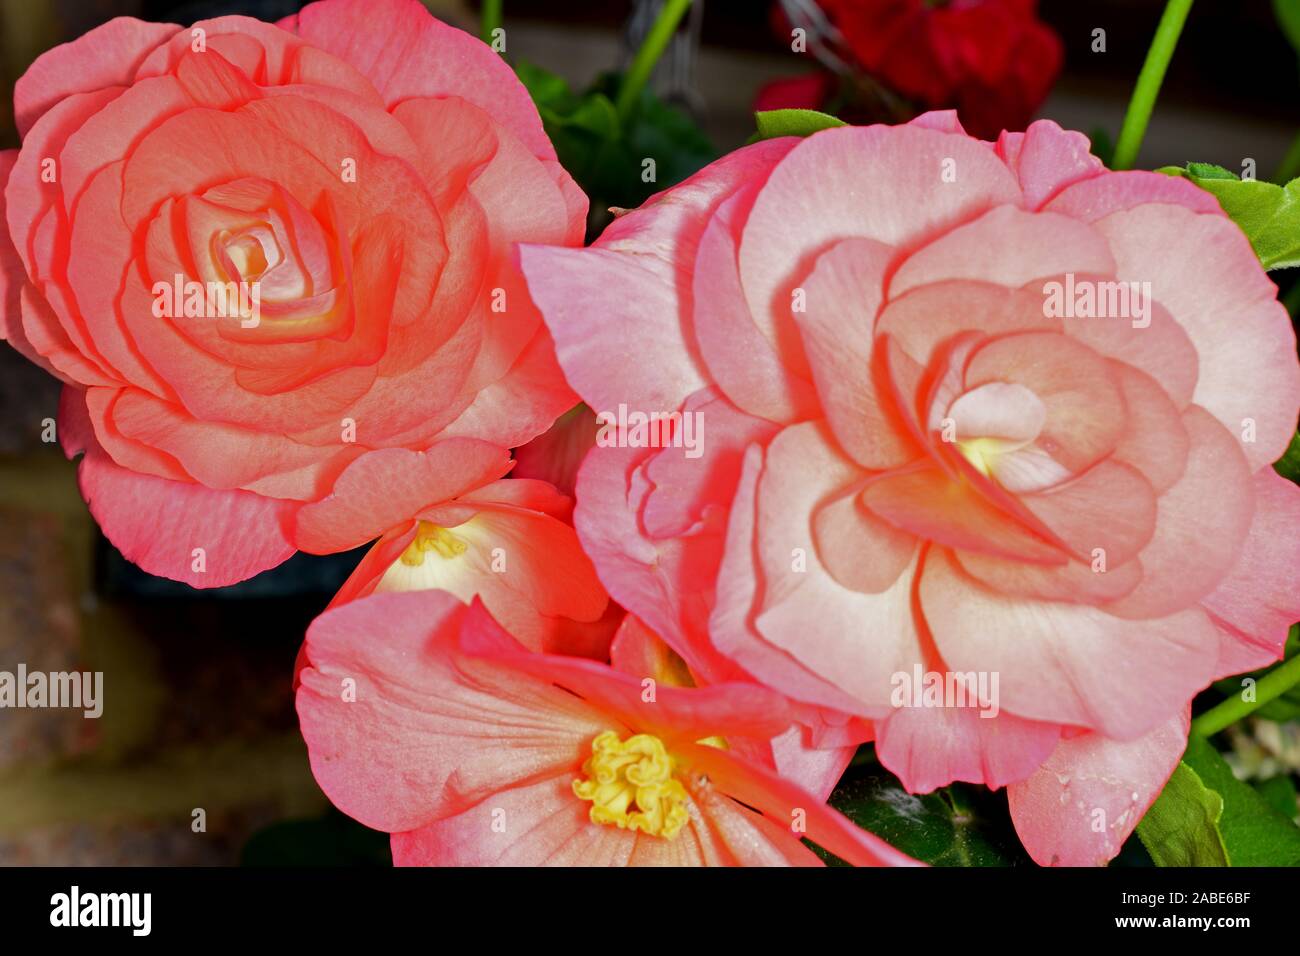 Begonia. Type Non-Stop Citus. Close up of two pink rose type flowers. Stock Photo